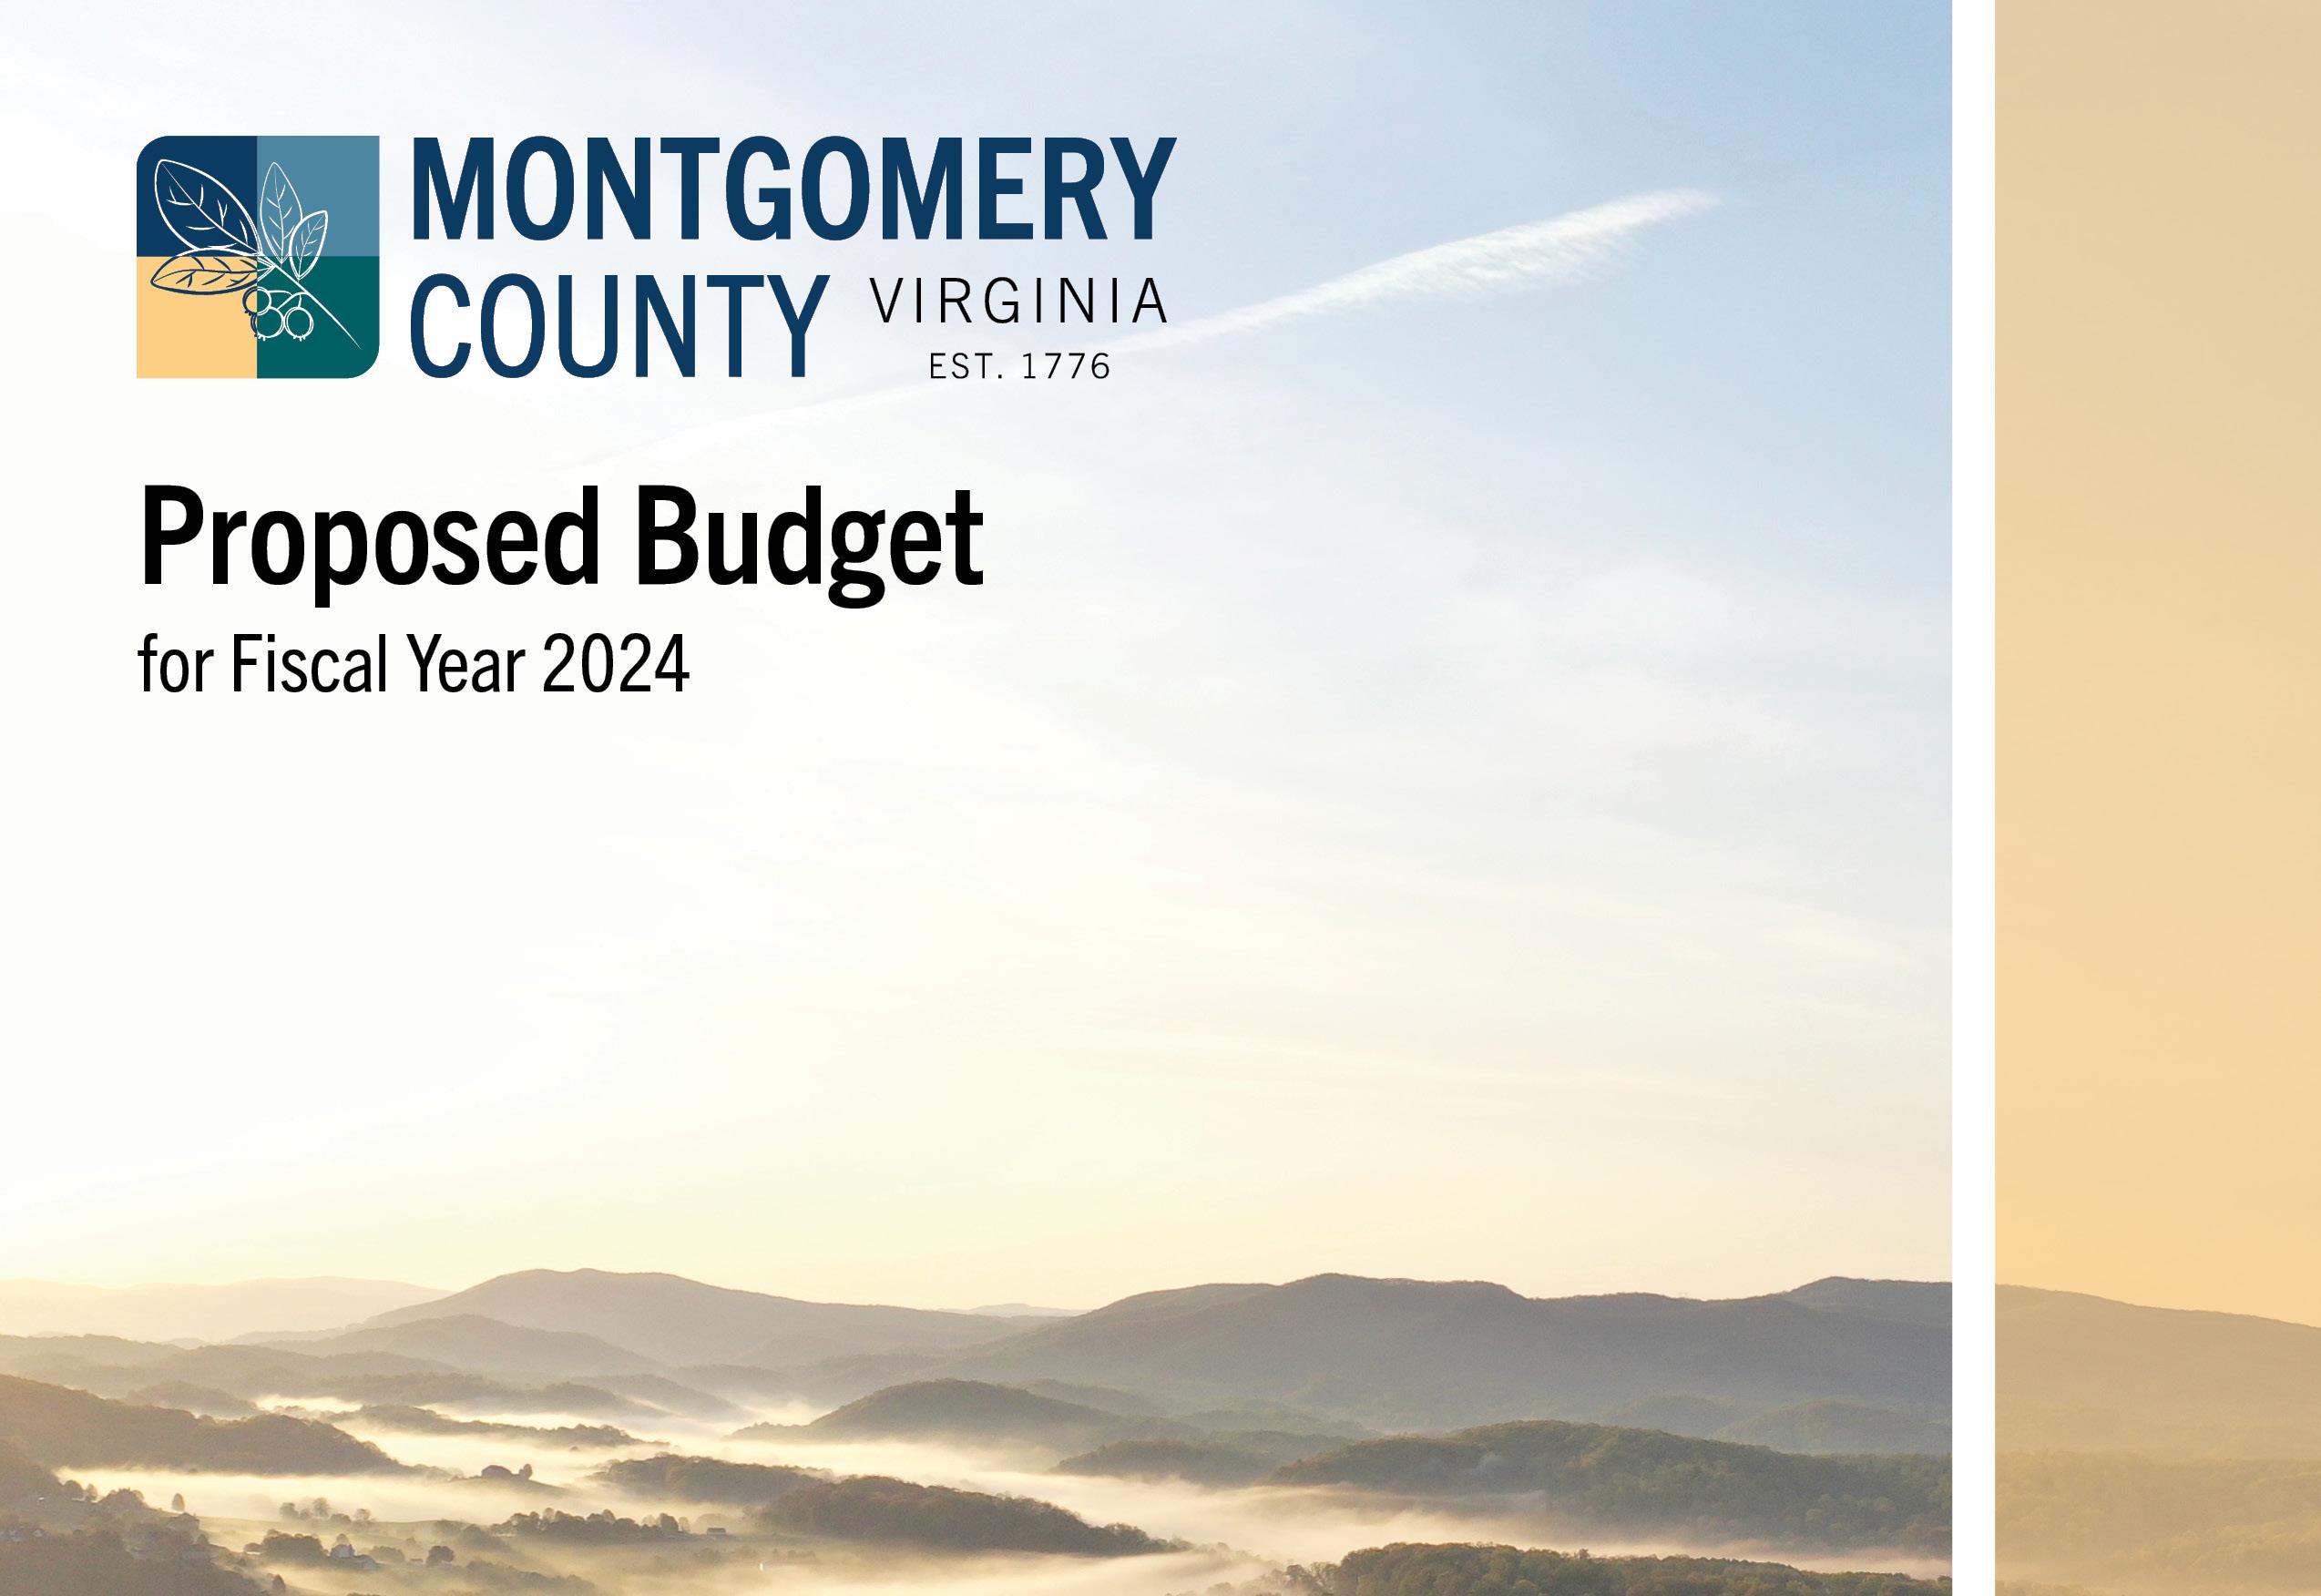 FY 2024 Proposed Budget